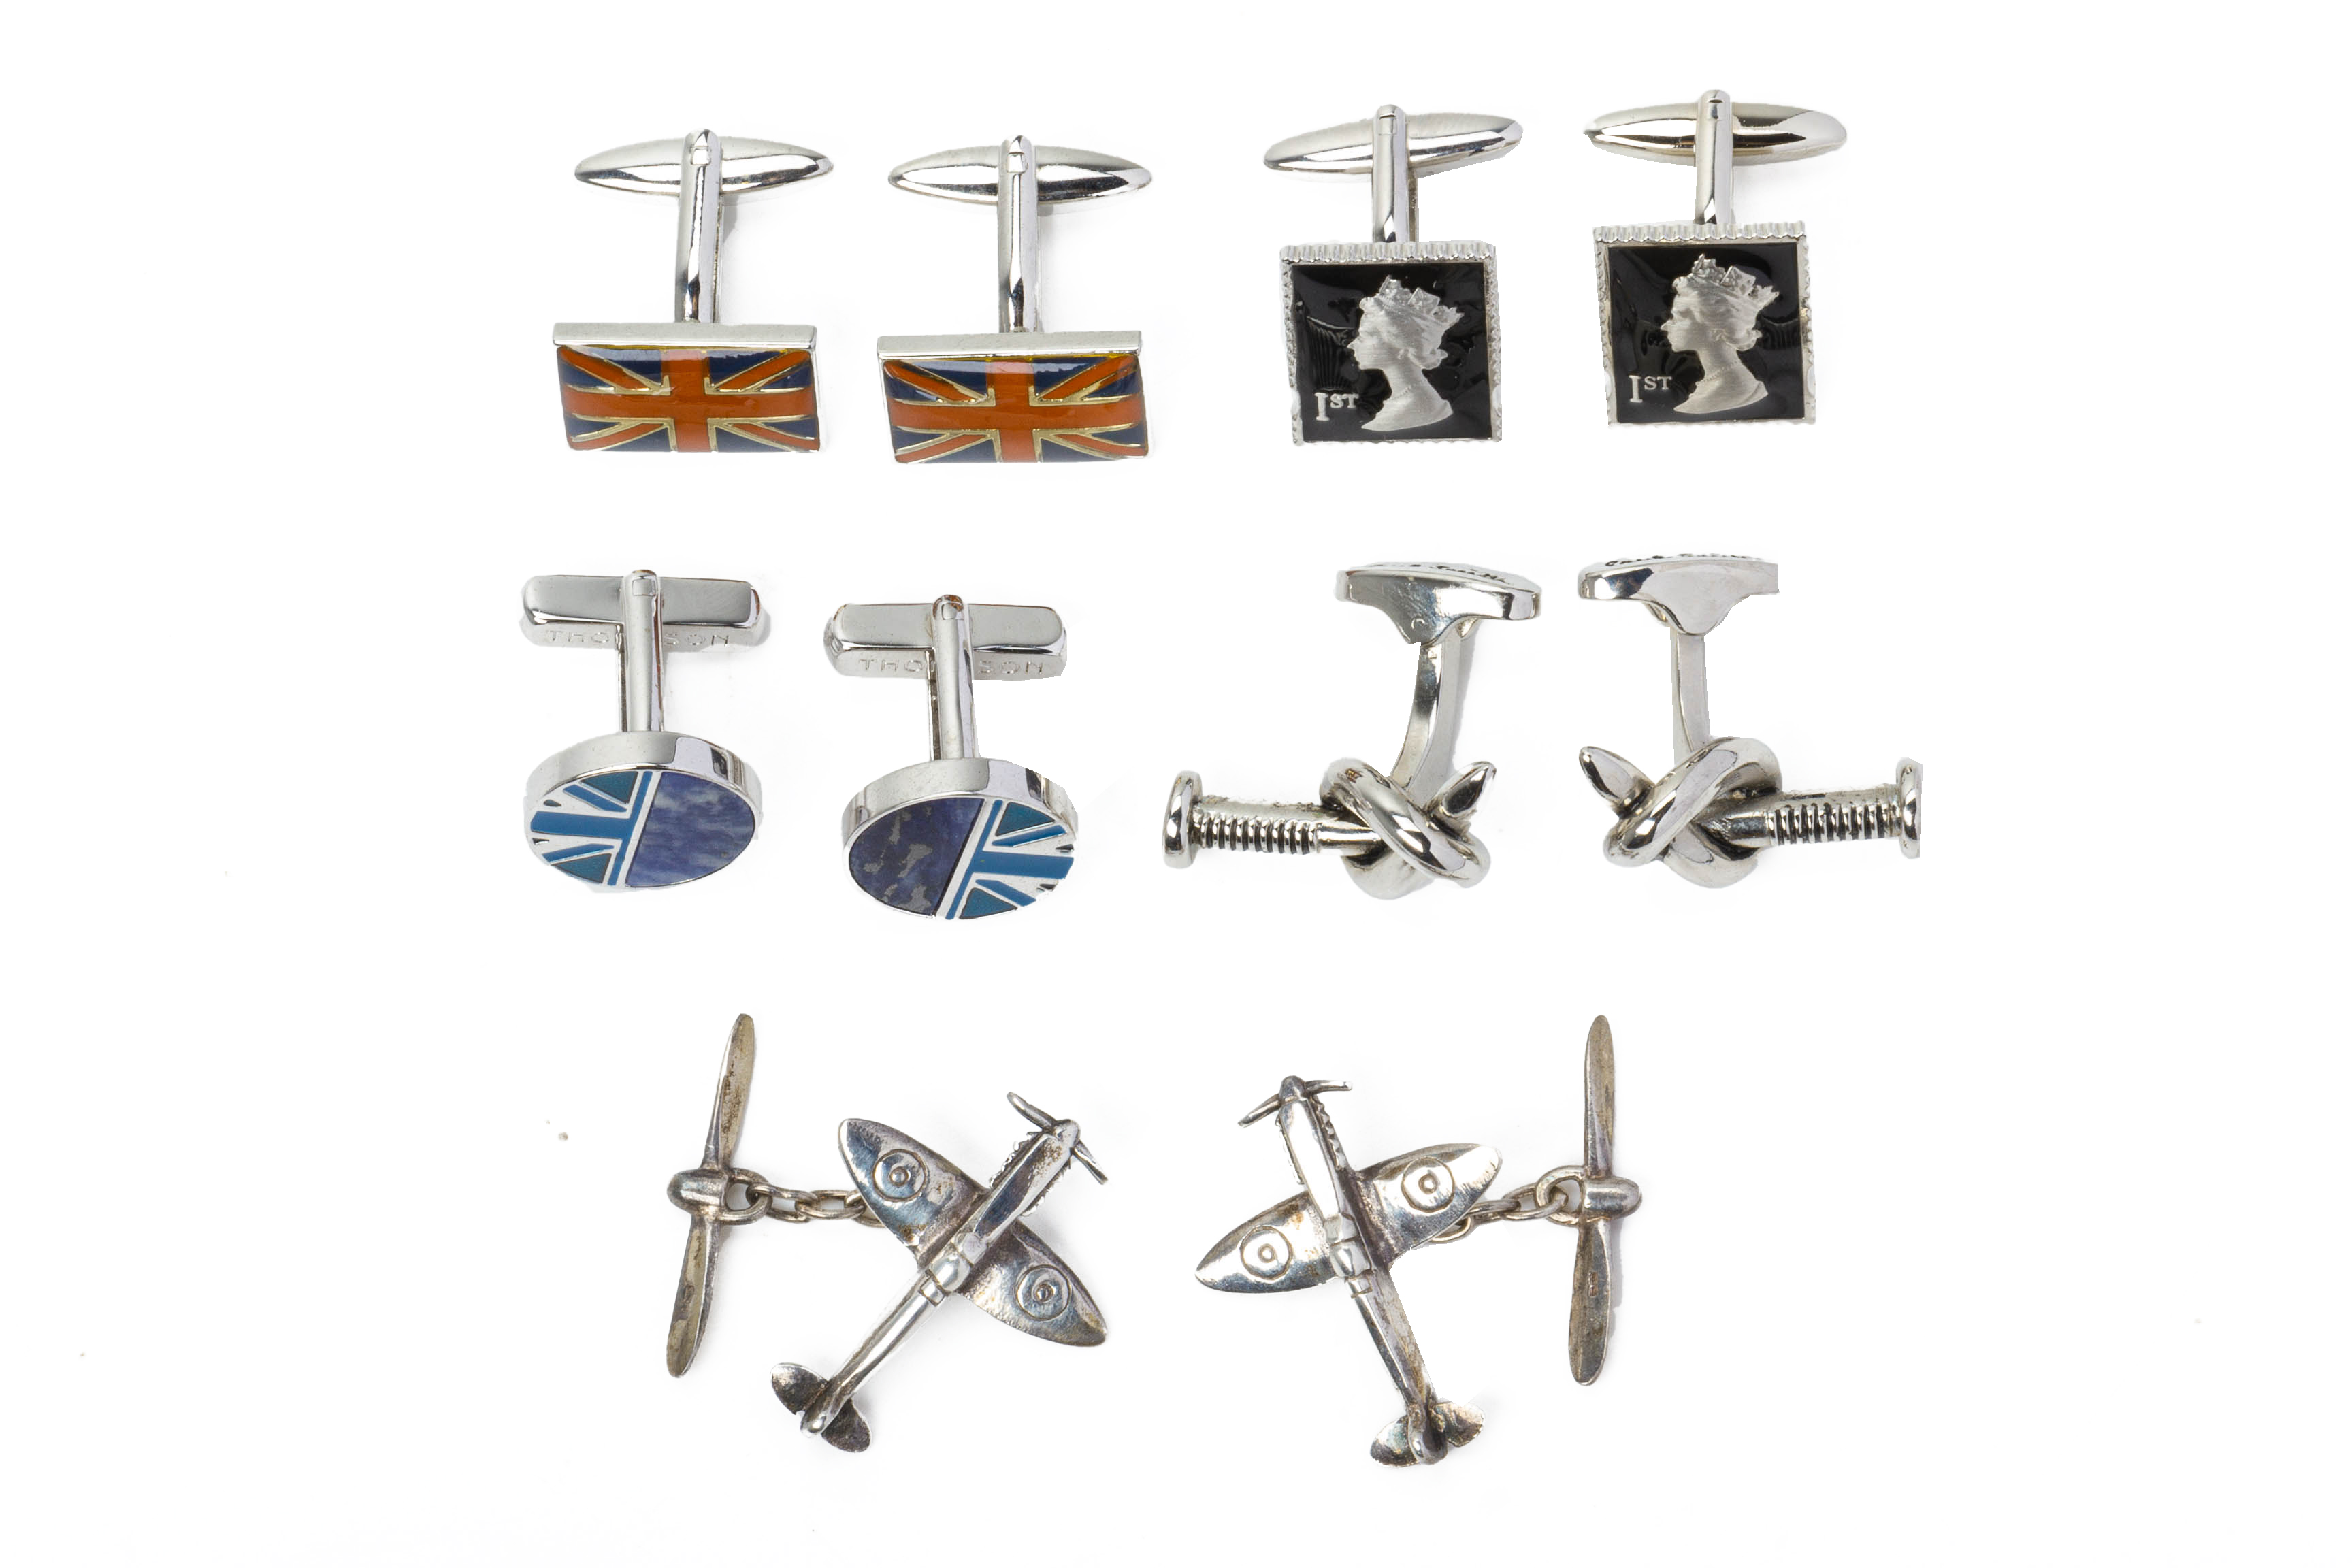 FIVE PAIRS OF UK RELATED NOVELTY CUFFLINKLS - Image 2 of 2